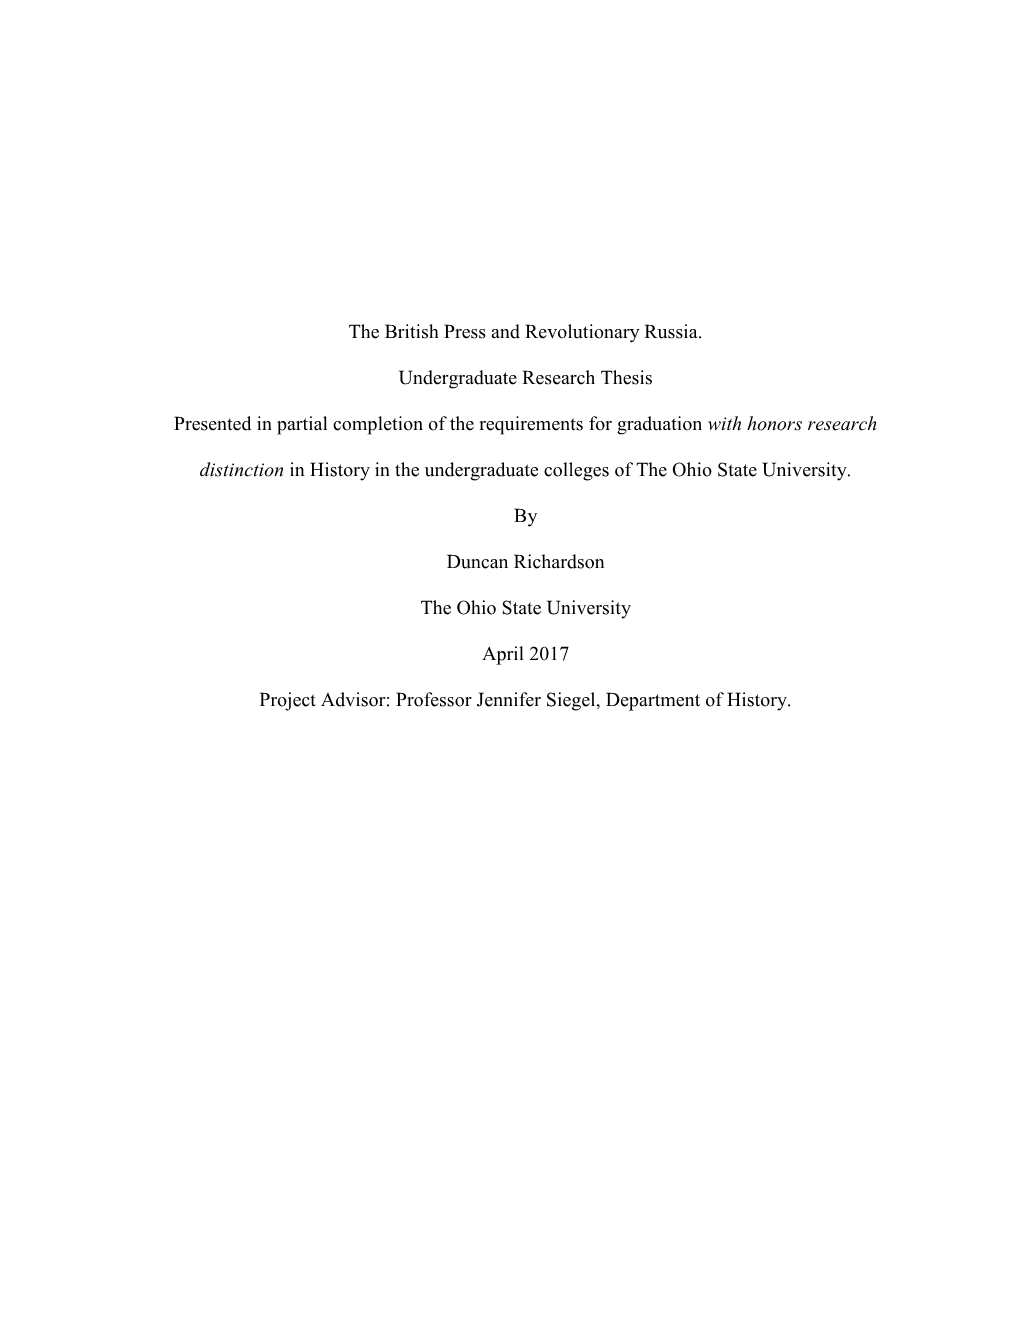 The British Press and Revolutionary Russia. Undergraduate Research Thesis Presented in Partial Completion of the Requirements Fo